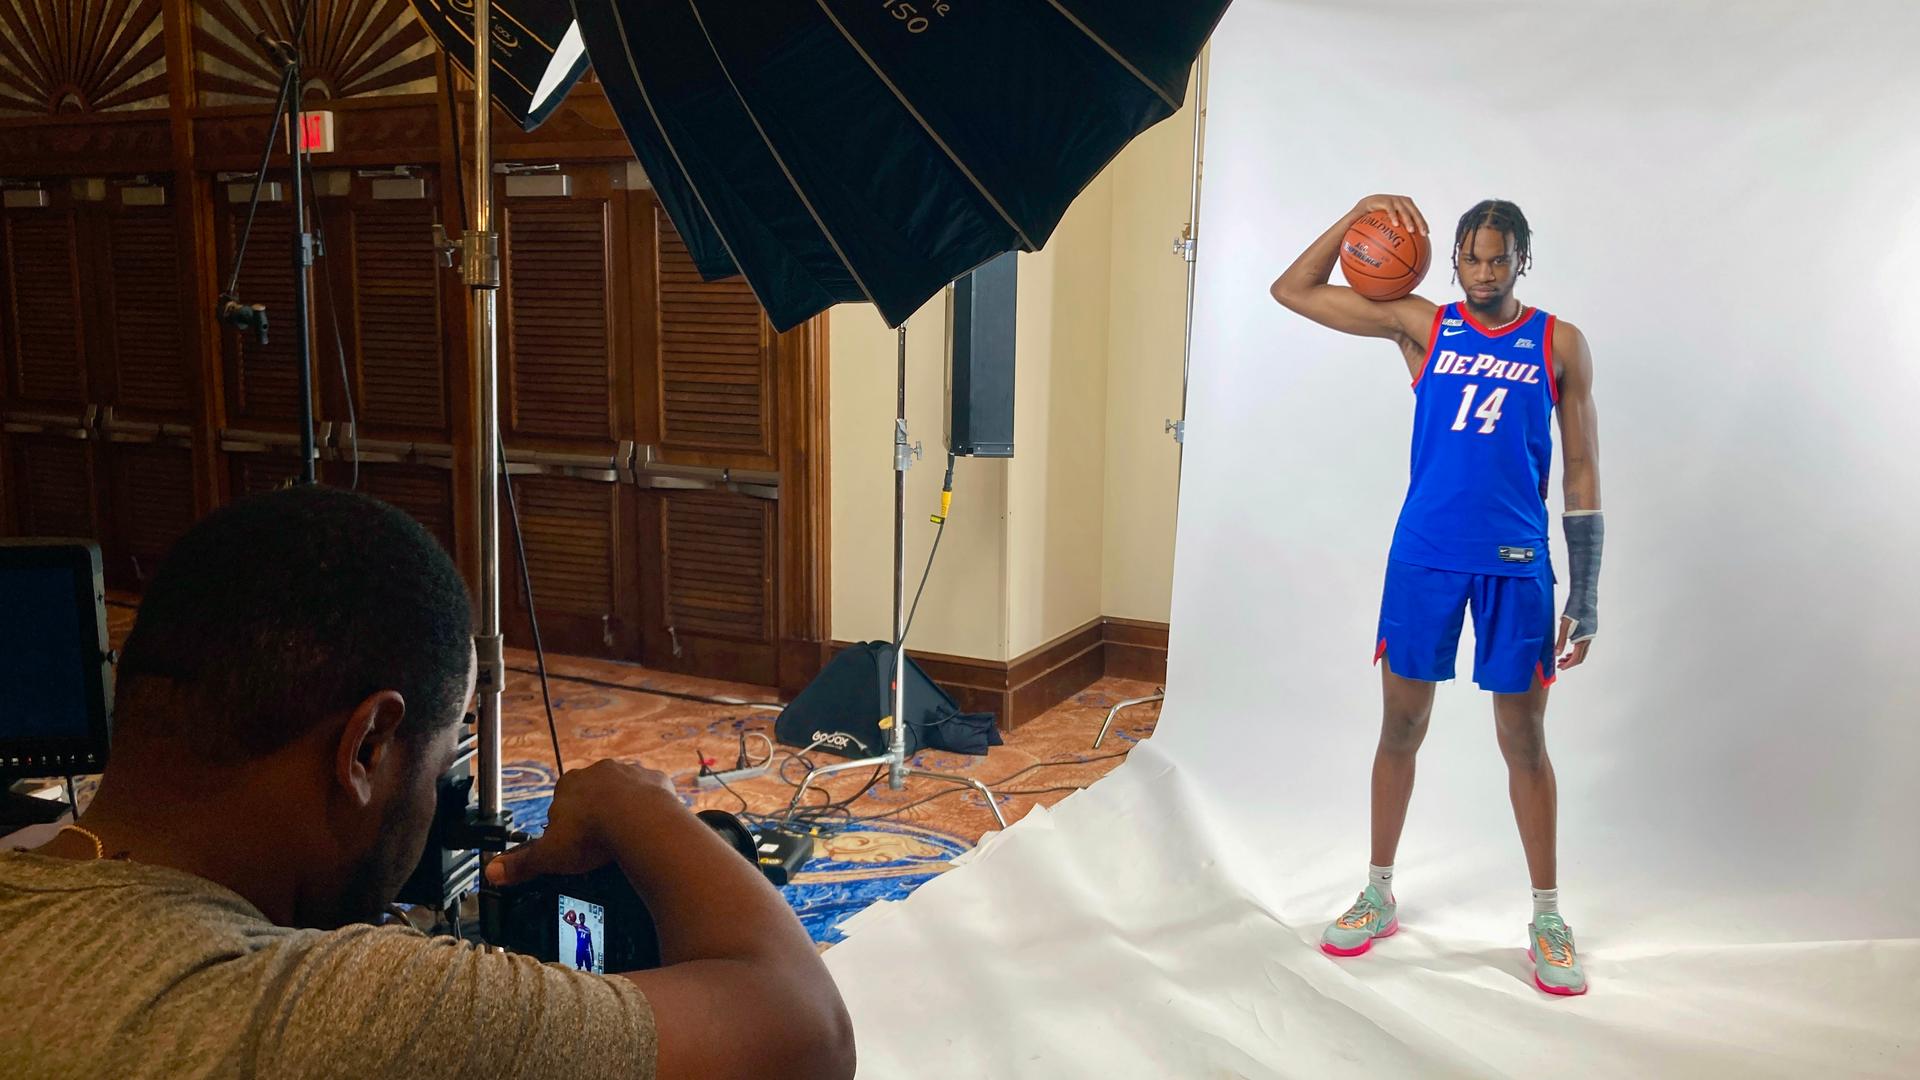 Student athlete posing in a blue uniform and holding a basketball at a photo shoot